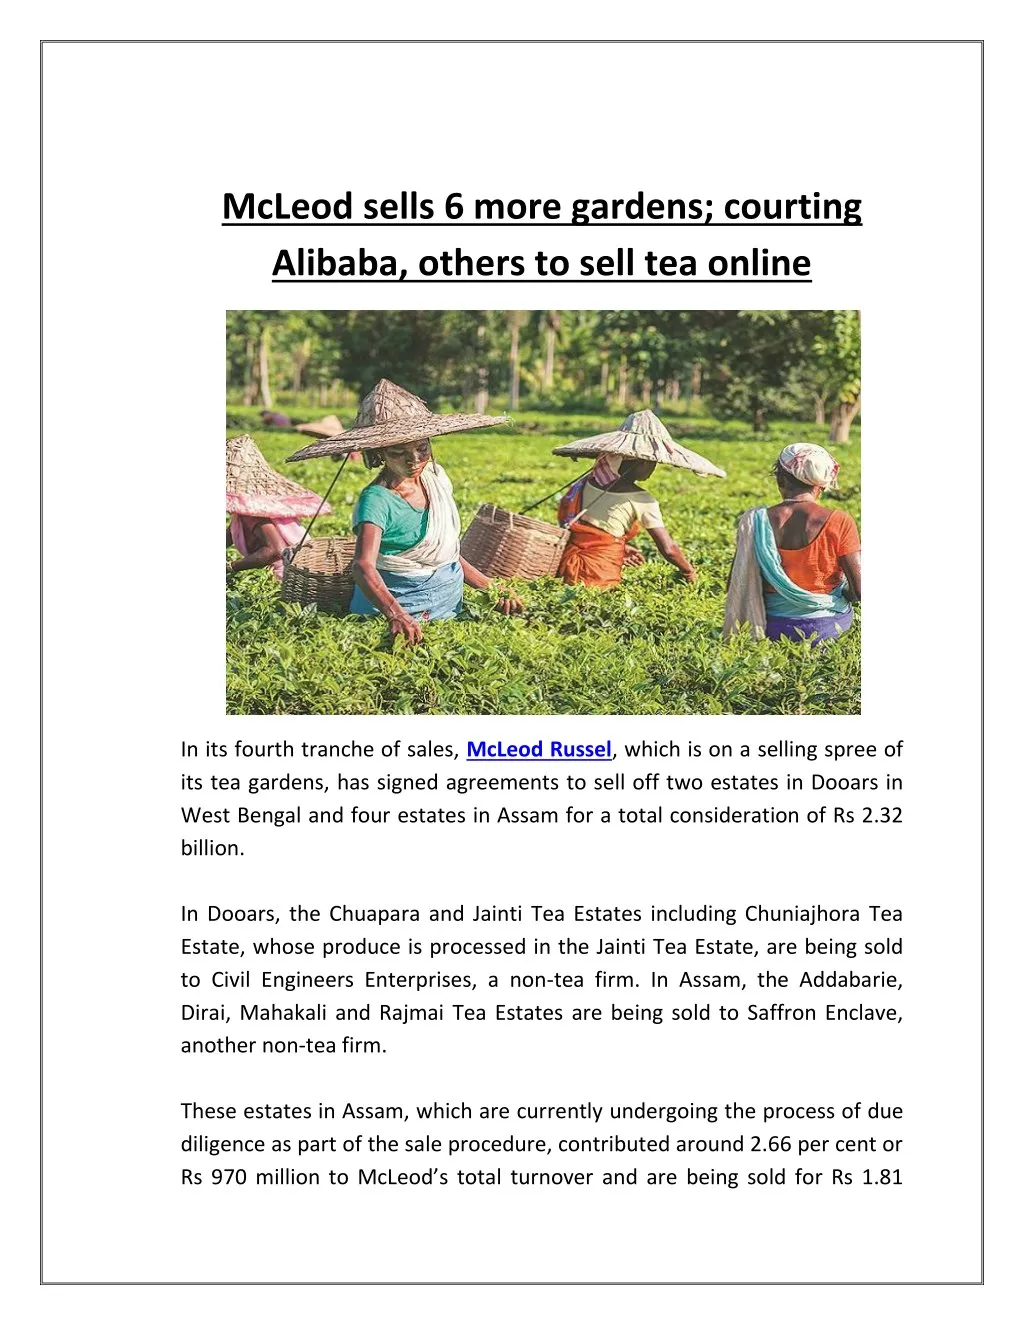 mcleod sells 6 more gardens courting alibaba